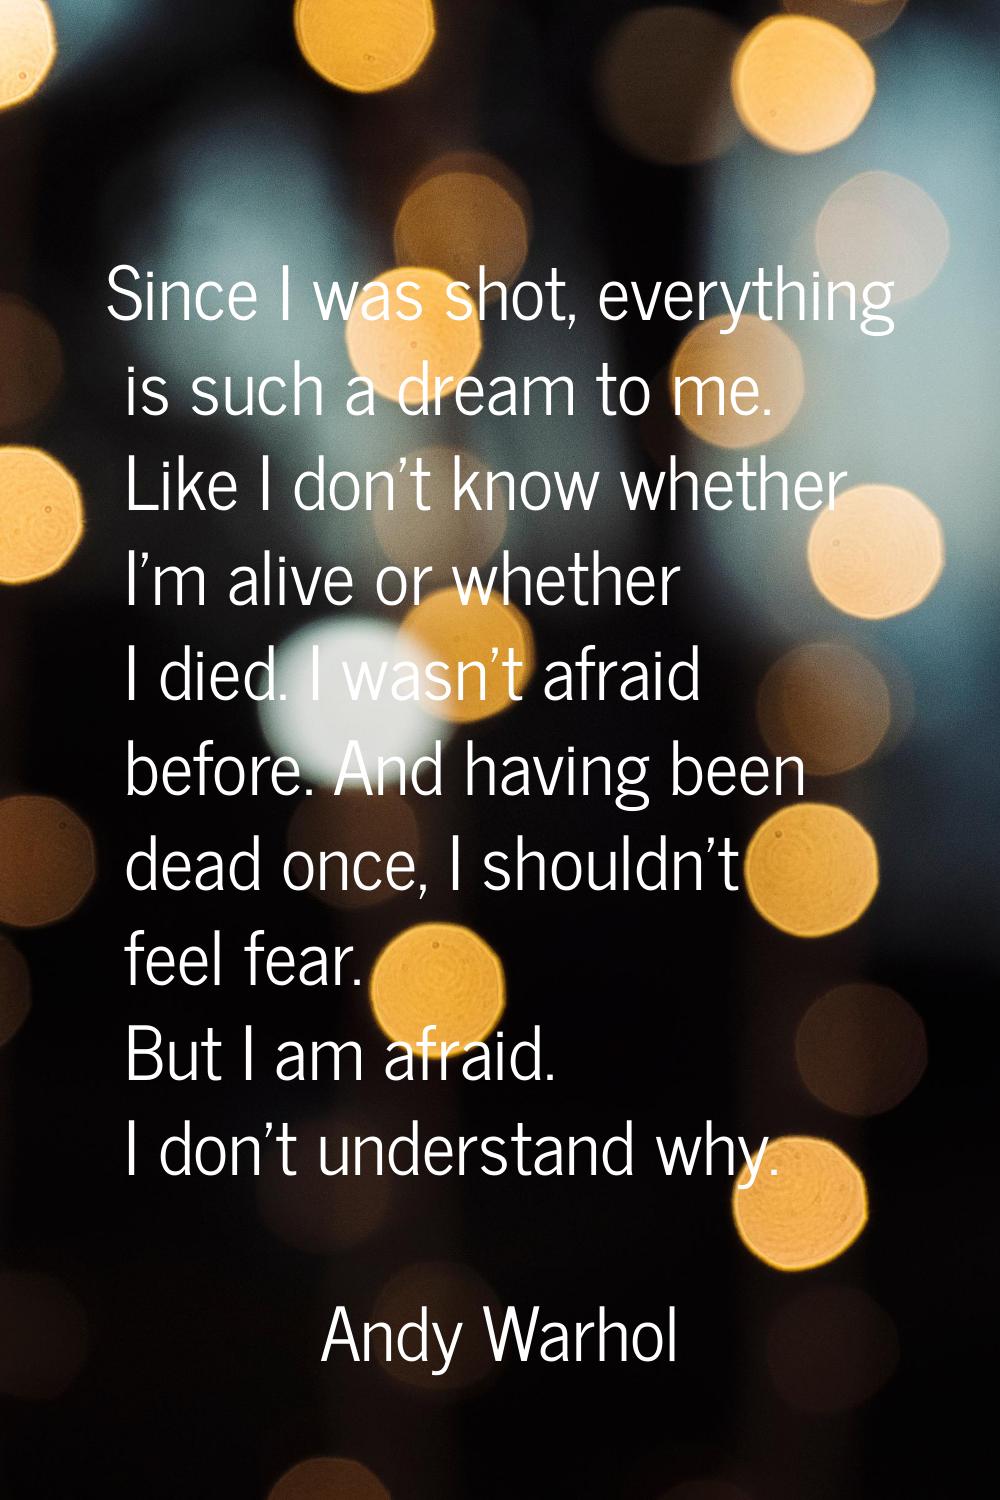 Since I was shot, everything is such a dream to me. Like I don't know whether I'm alive or whether 